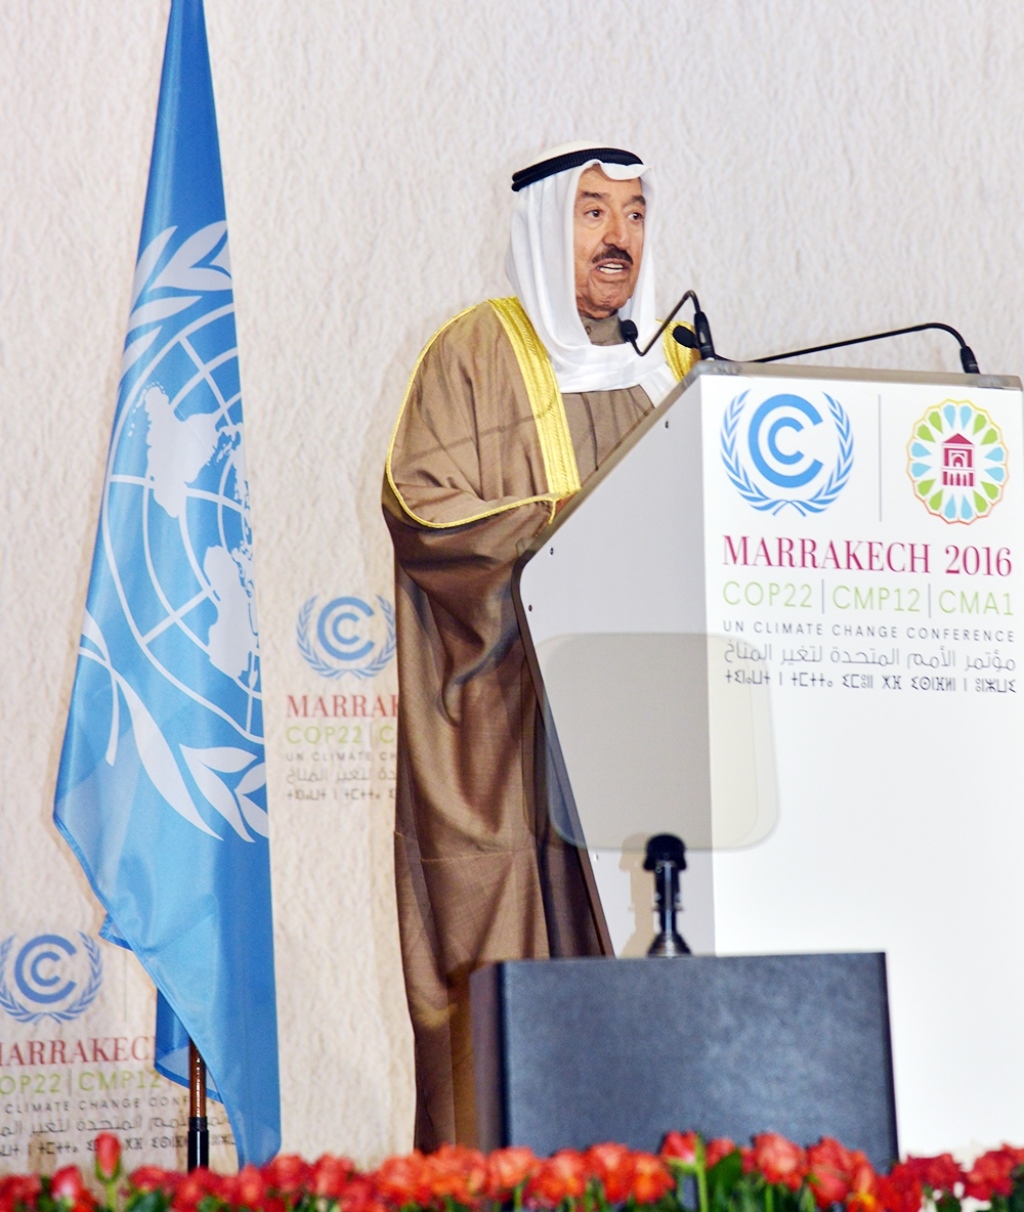 His Highness the Amir Sheikh Sabah Al-Ahmad Al-Jaber Al-Sabah during the 22nd Conference of the Parties to the United Nations Framework Convention on Climate Change